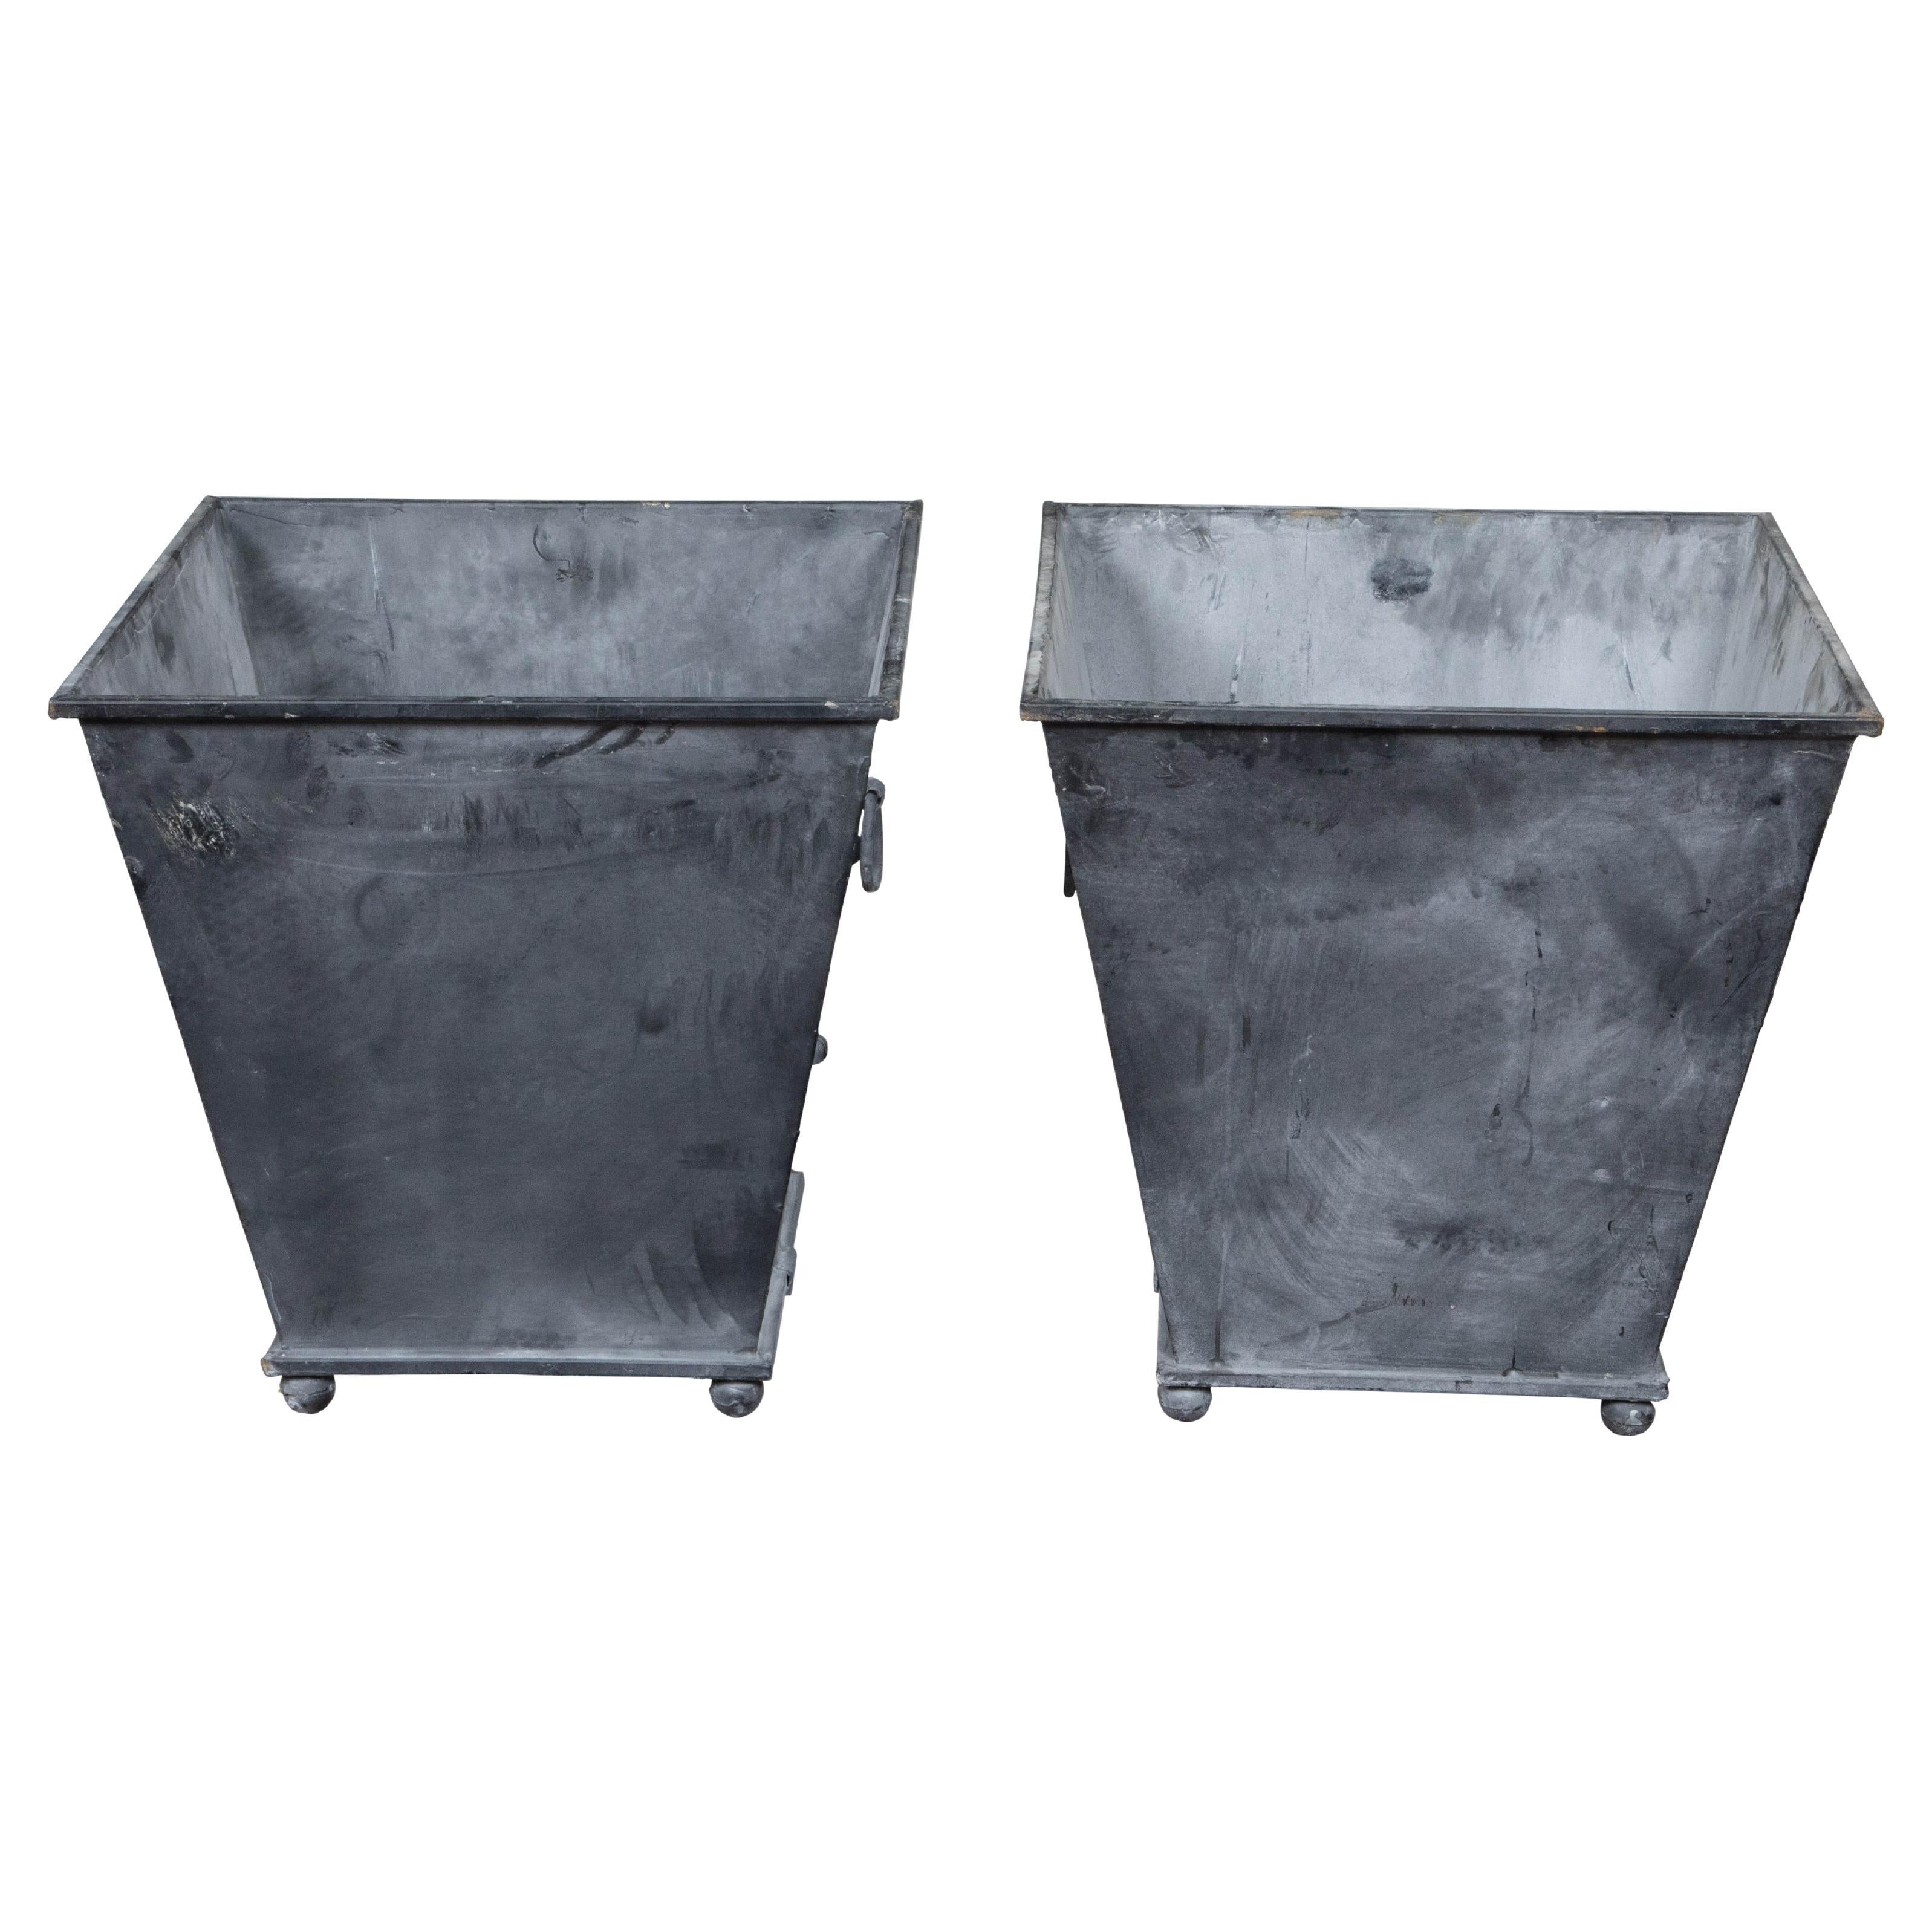 Pair of Industrial Style Grey Metal Planters with Tapered Lines and Ring Pulls